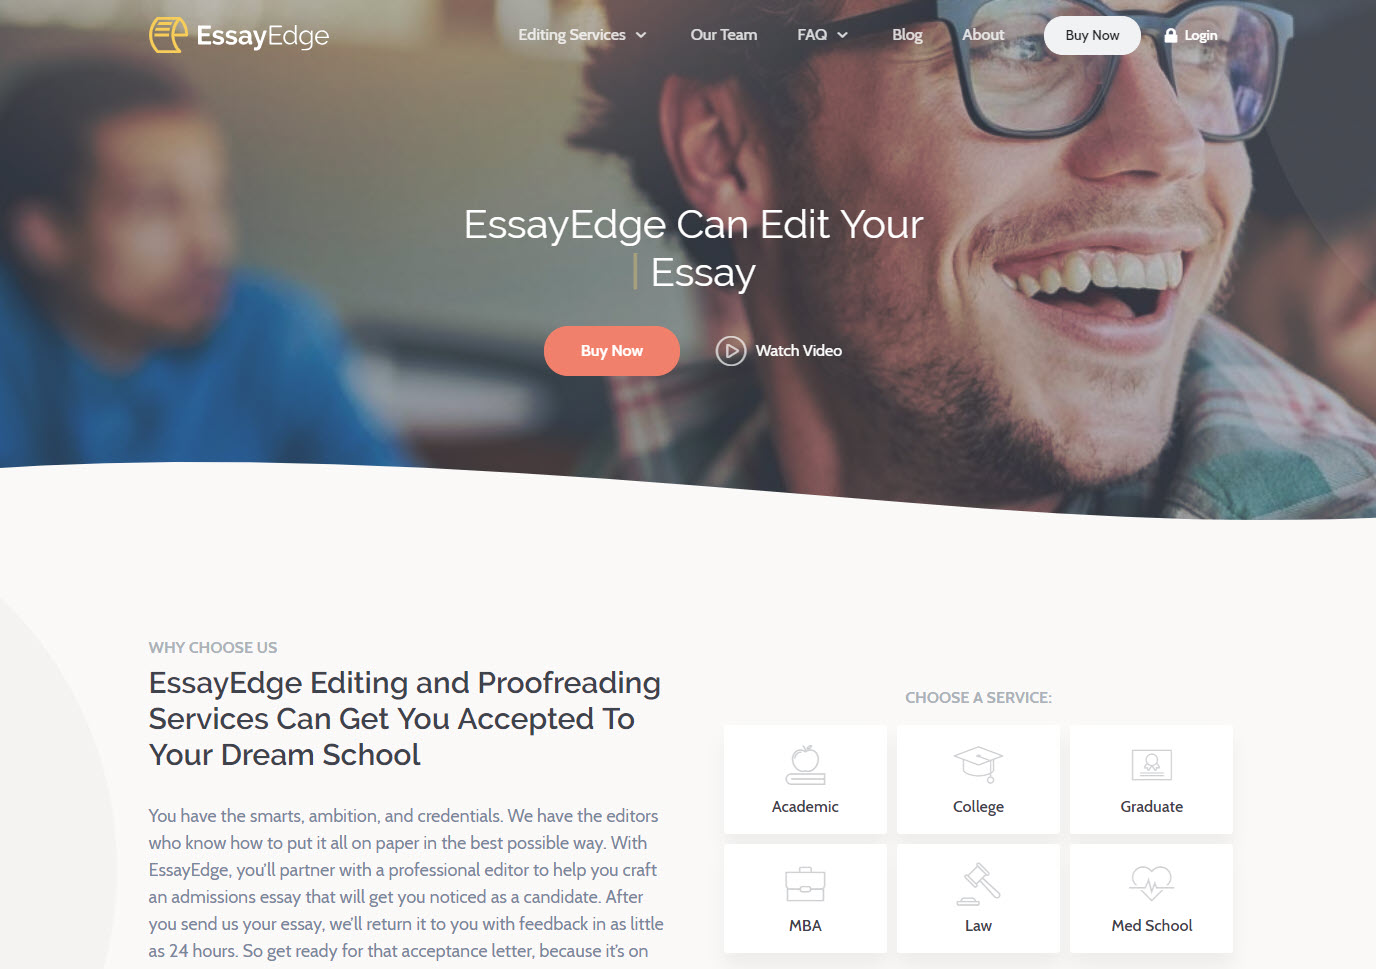 If you need help with an essay, EssayEdge is the best resource out there, providing expert advice from Ivy League editors with a lightning-quick turnaround!